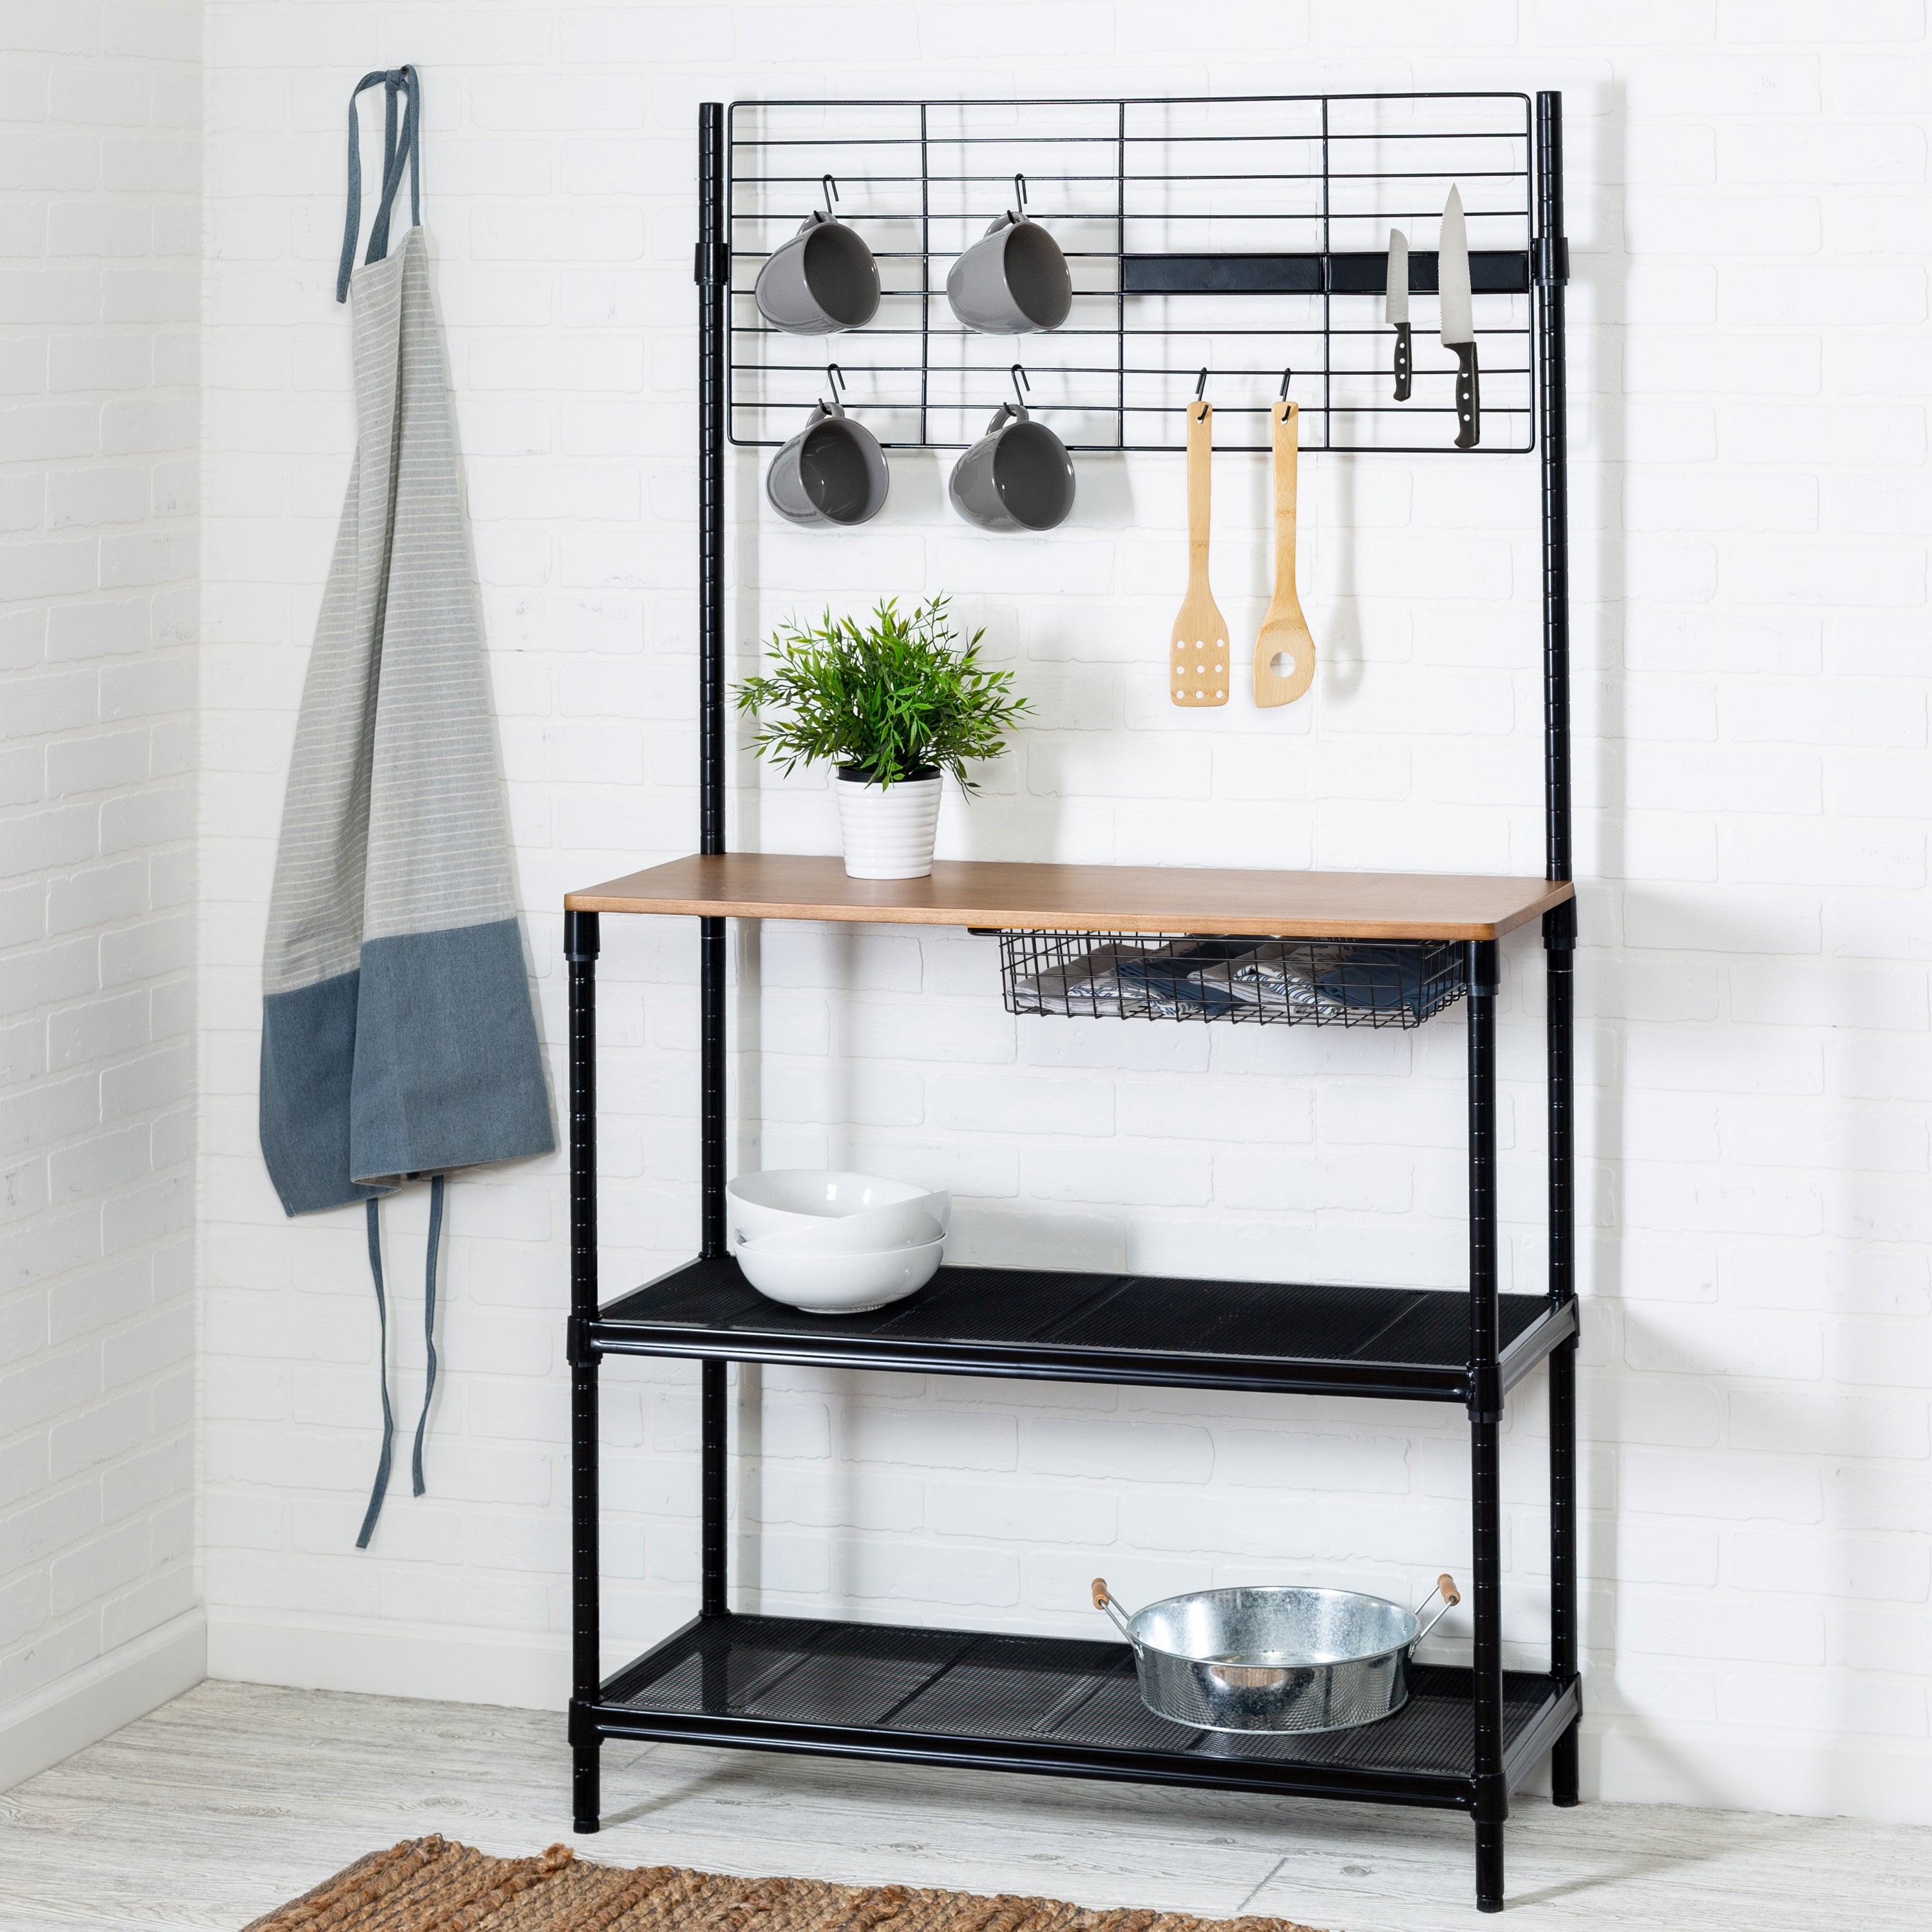 65" Bakers Rack w/ Cutting Board and Hanging Storage Black